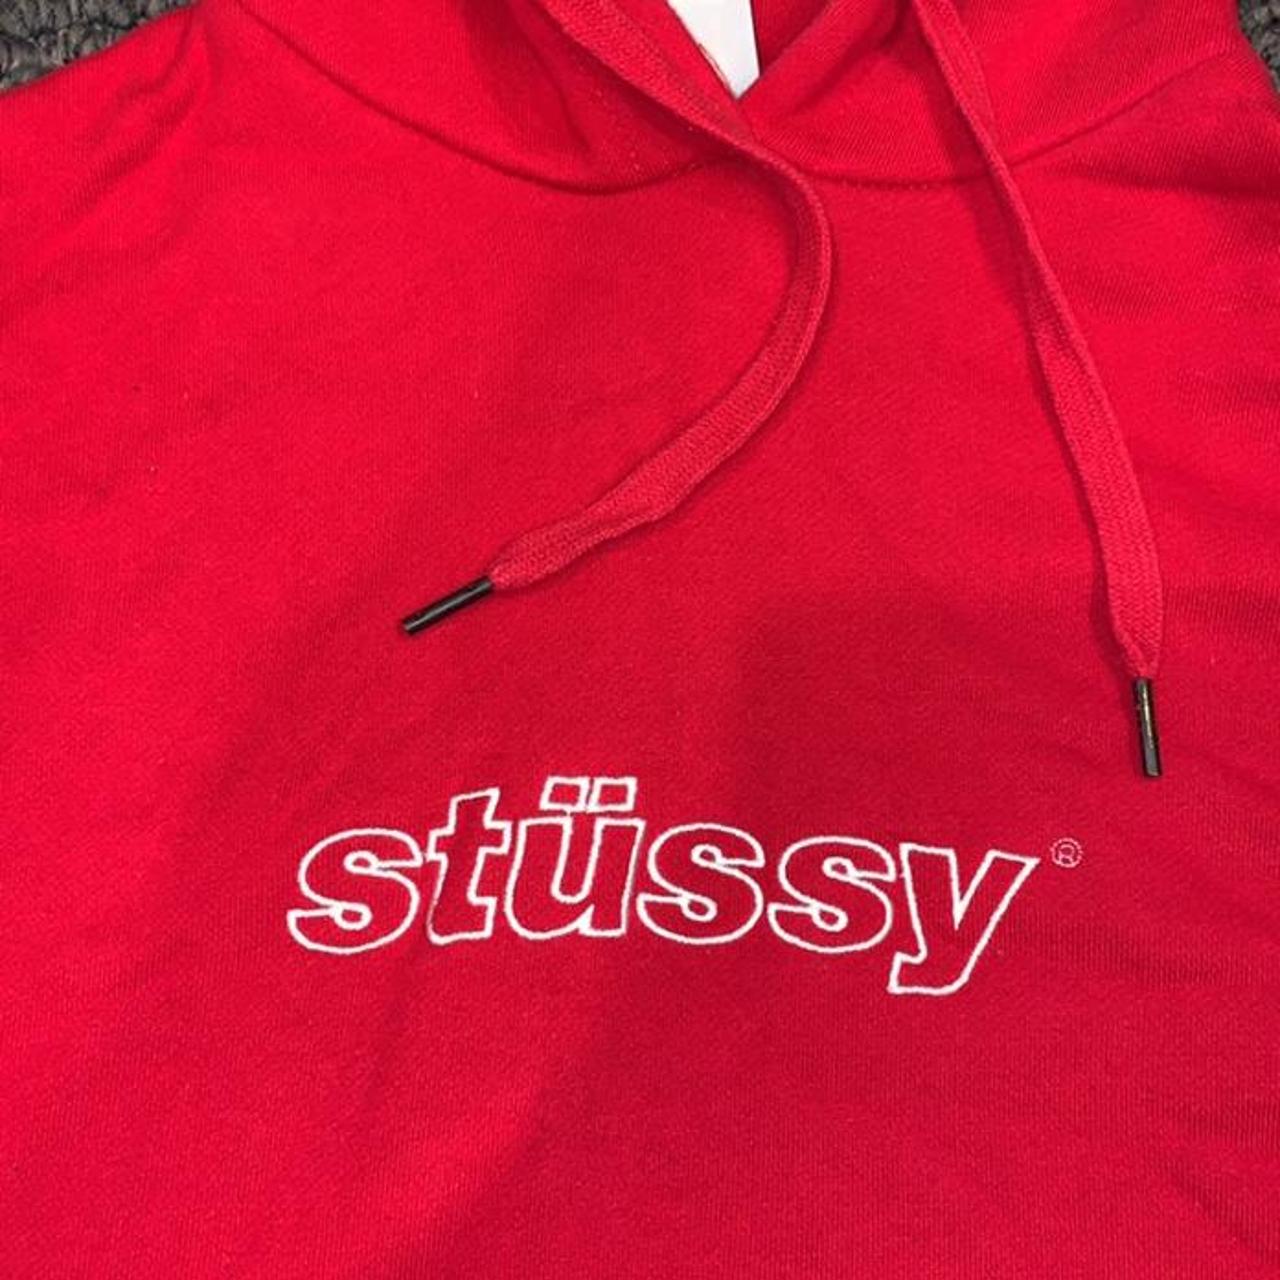 NEAR NEW RED STUSSY HOODIE WITH LOGO UNISEX MENS... - Depop